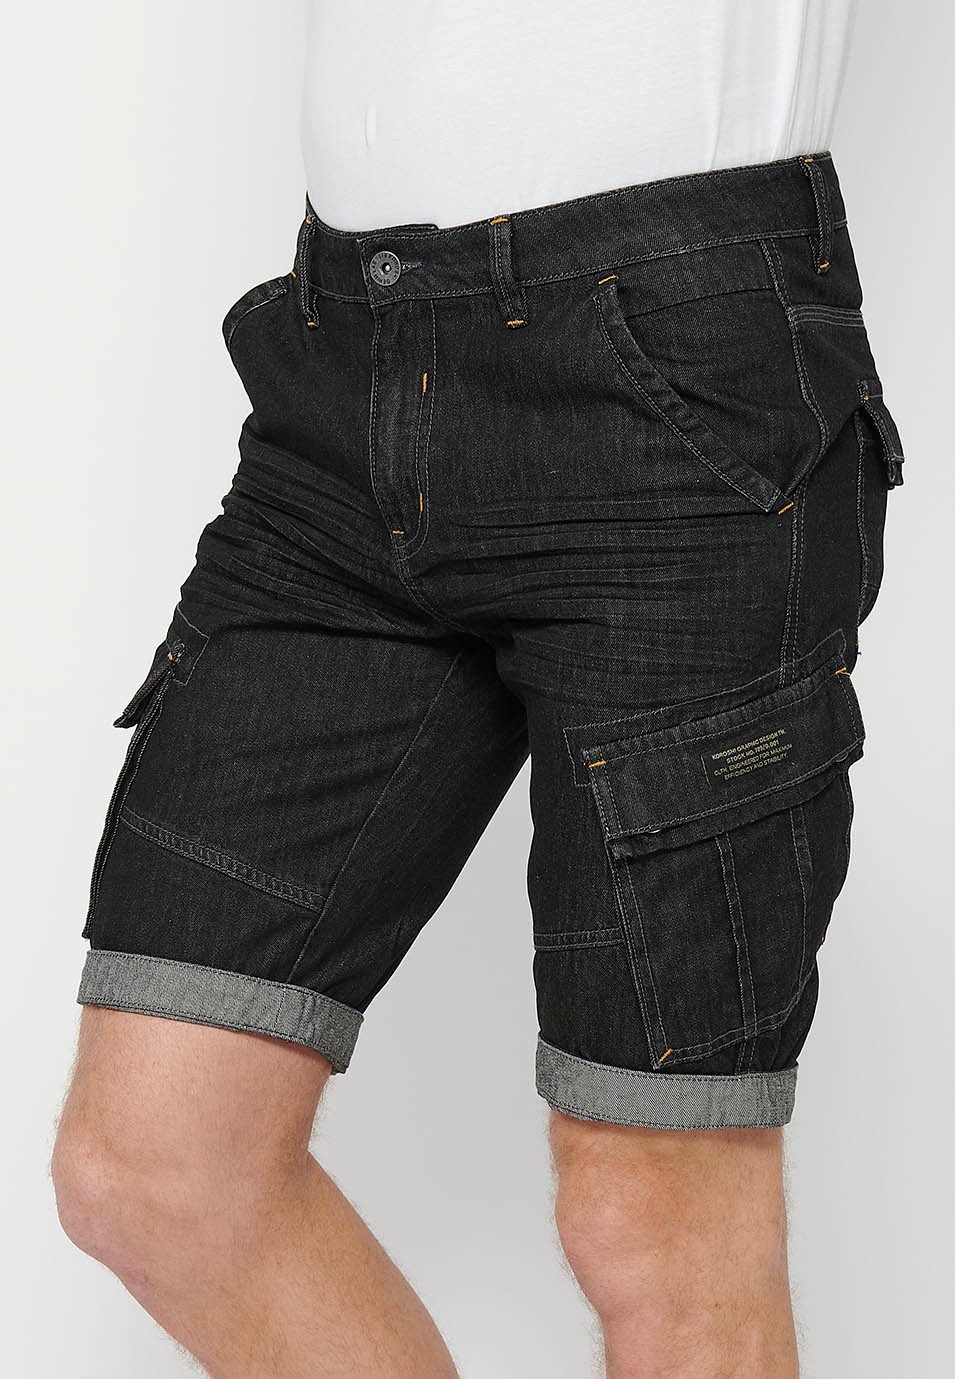 Denim Bermuda Shorts with Turn-Up Finish and Front Zipper and Button Closure with Pockets, One Ticket Pocket and Two Side Pockets in Black for Men 5